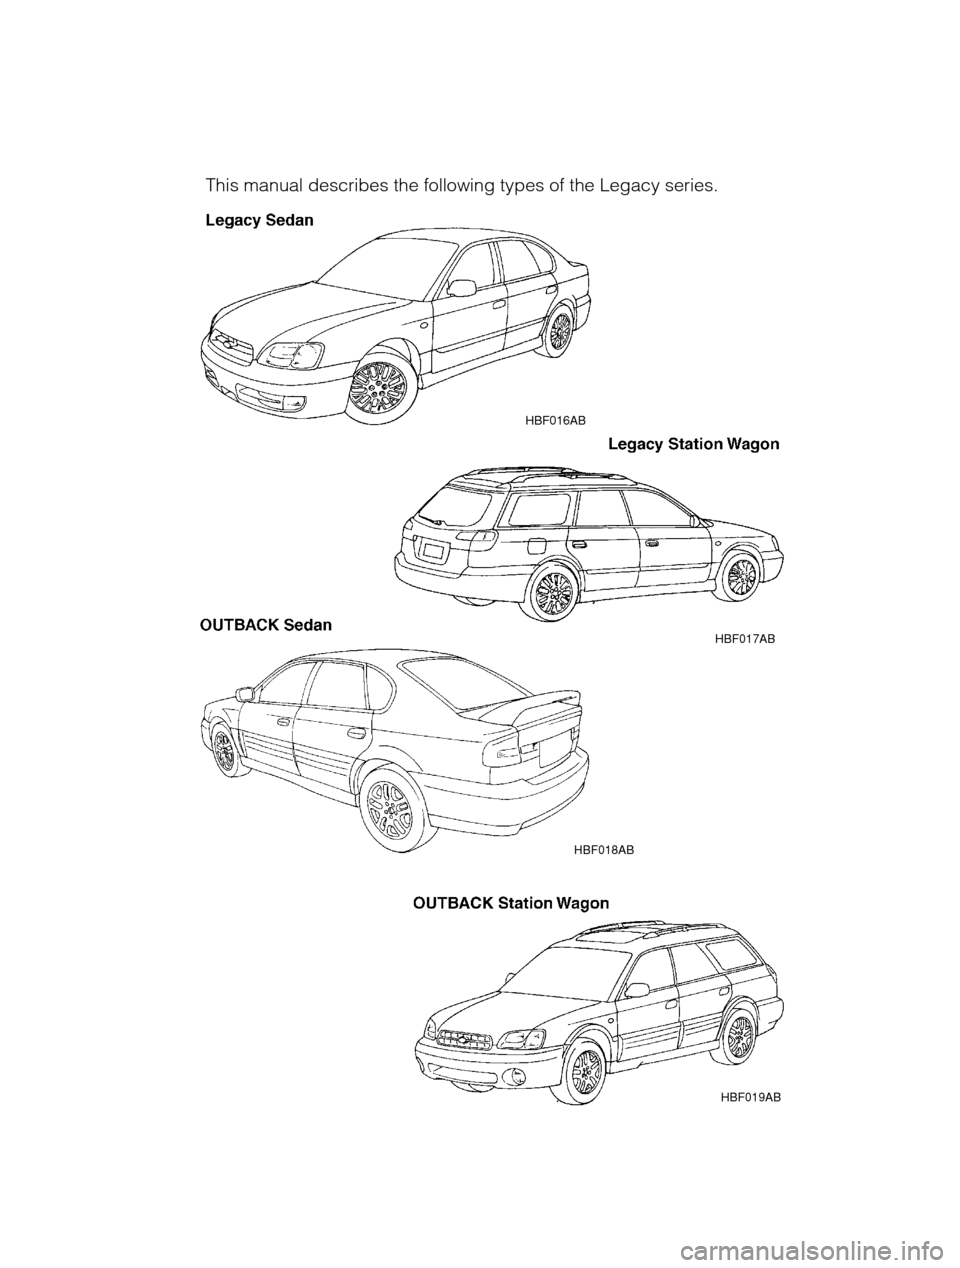 SUBARU FORESTER 2002 SG / 2.G Owners Manual HBF016ABHBF017AB
This manual describes the following types of the Legacy series.
HBF019AB
HBF018AB       